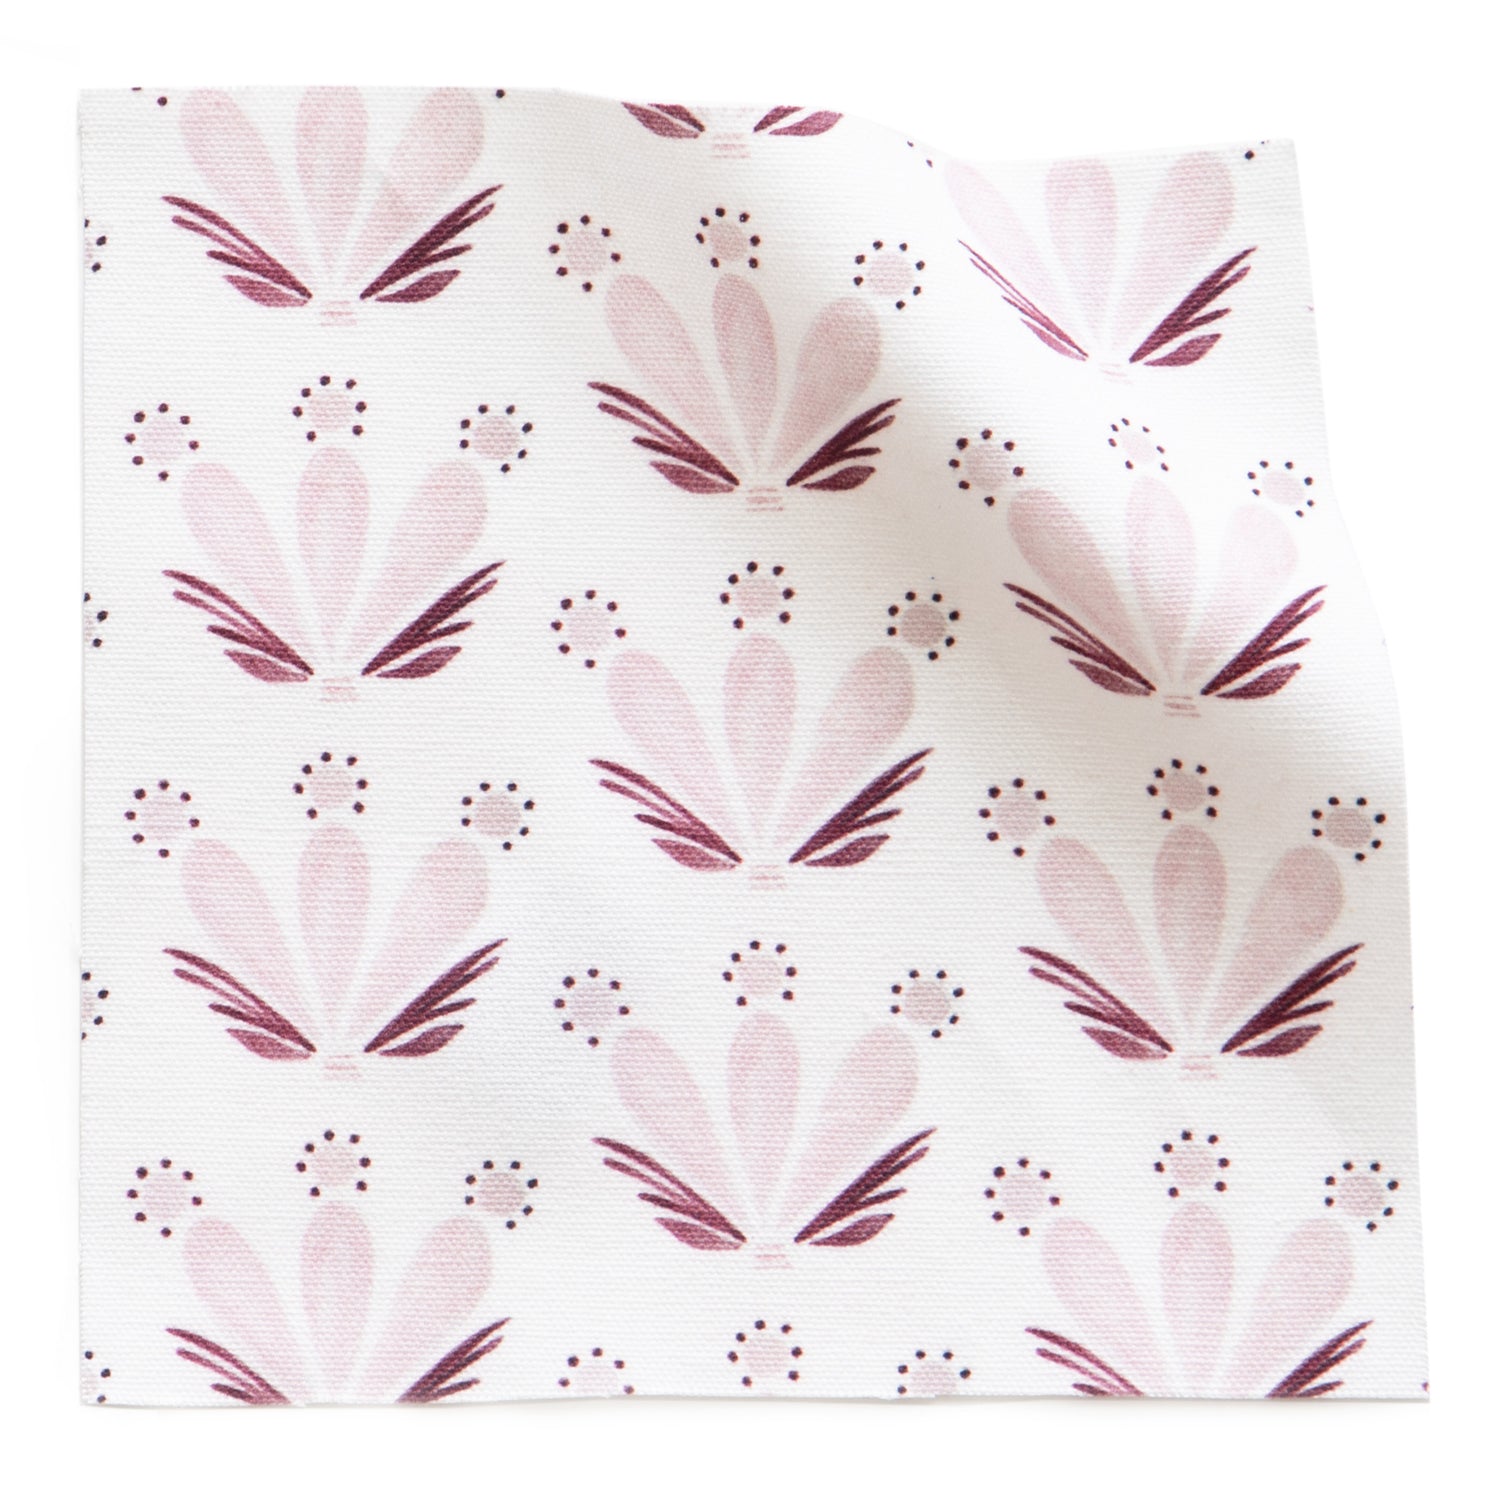 Burgundy Web Floral Wrapping Paper - 5 Yards